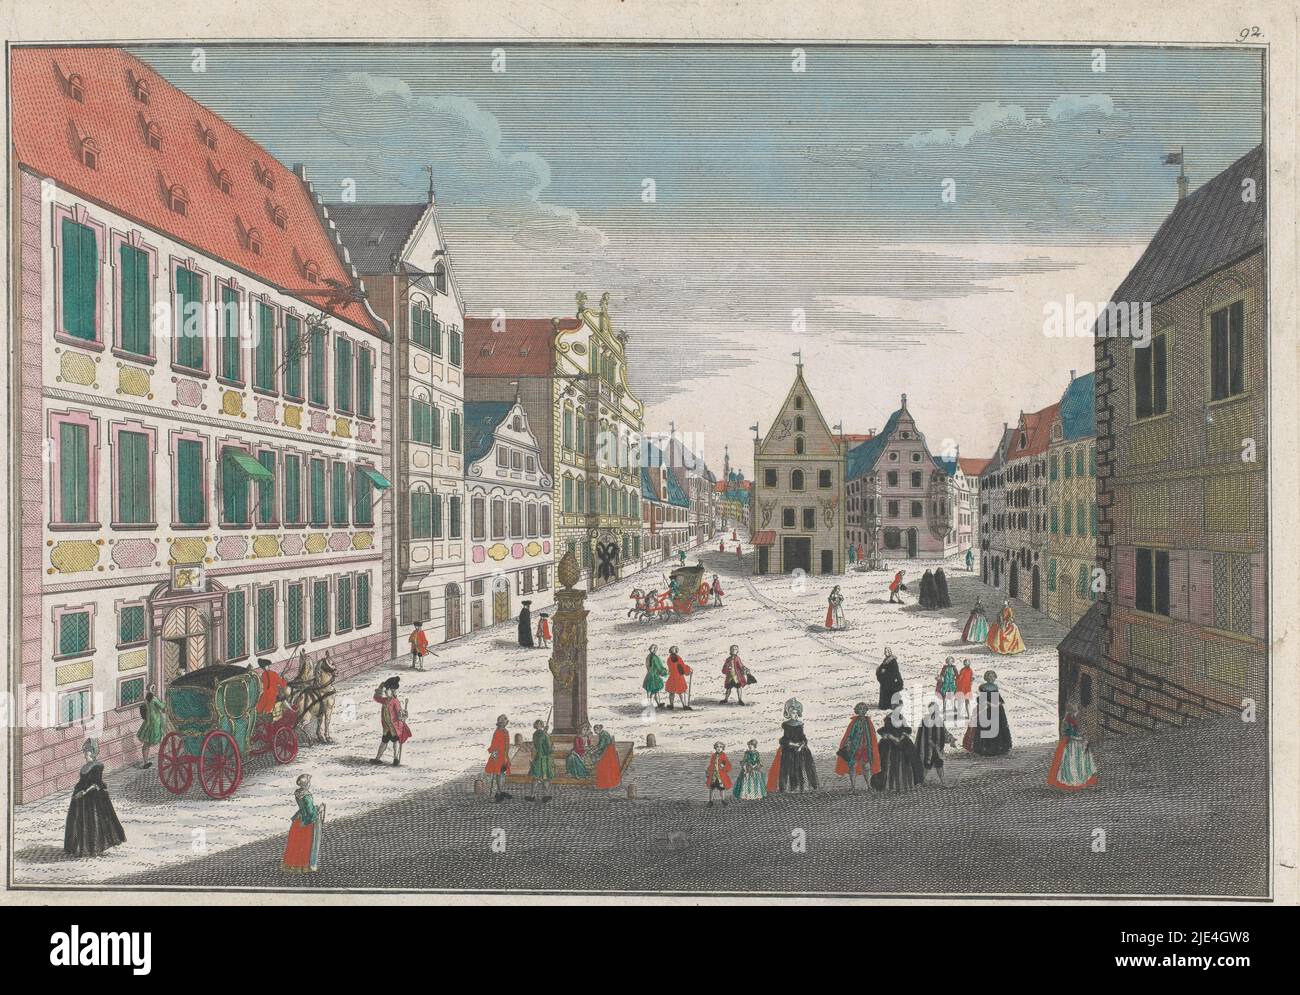 View of the Ulrichsplatz in Augsburg, Georg Balthasar Probst, after Karl Remshard, 1742 - 1801, In the center is the Salzstadel. In the background the City Hall and the Perlachturm. Numbered top right: 92. Lower left numbered: 24., publisher: Georg Balthasar Probst, (mentioned on object), print maker: anonymous, Karl Remshard, publisher: Augsburg, print maker: Germany, 1742 - 1801, paper, etching, brush, h 322 mm × w 425 mm Stock Photo